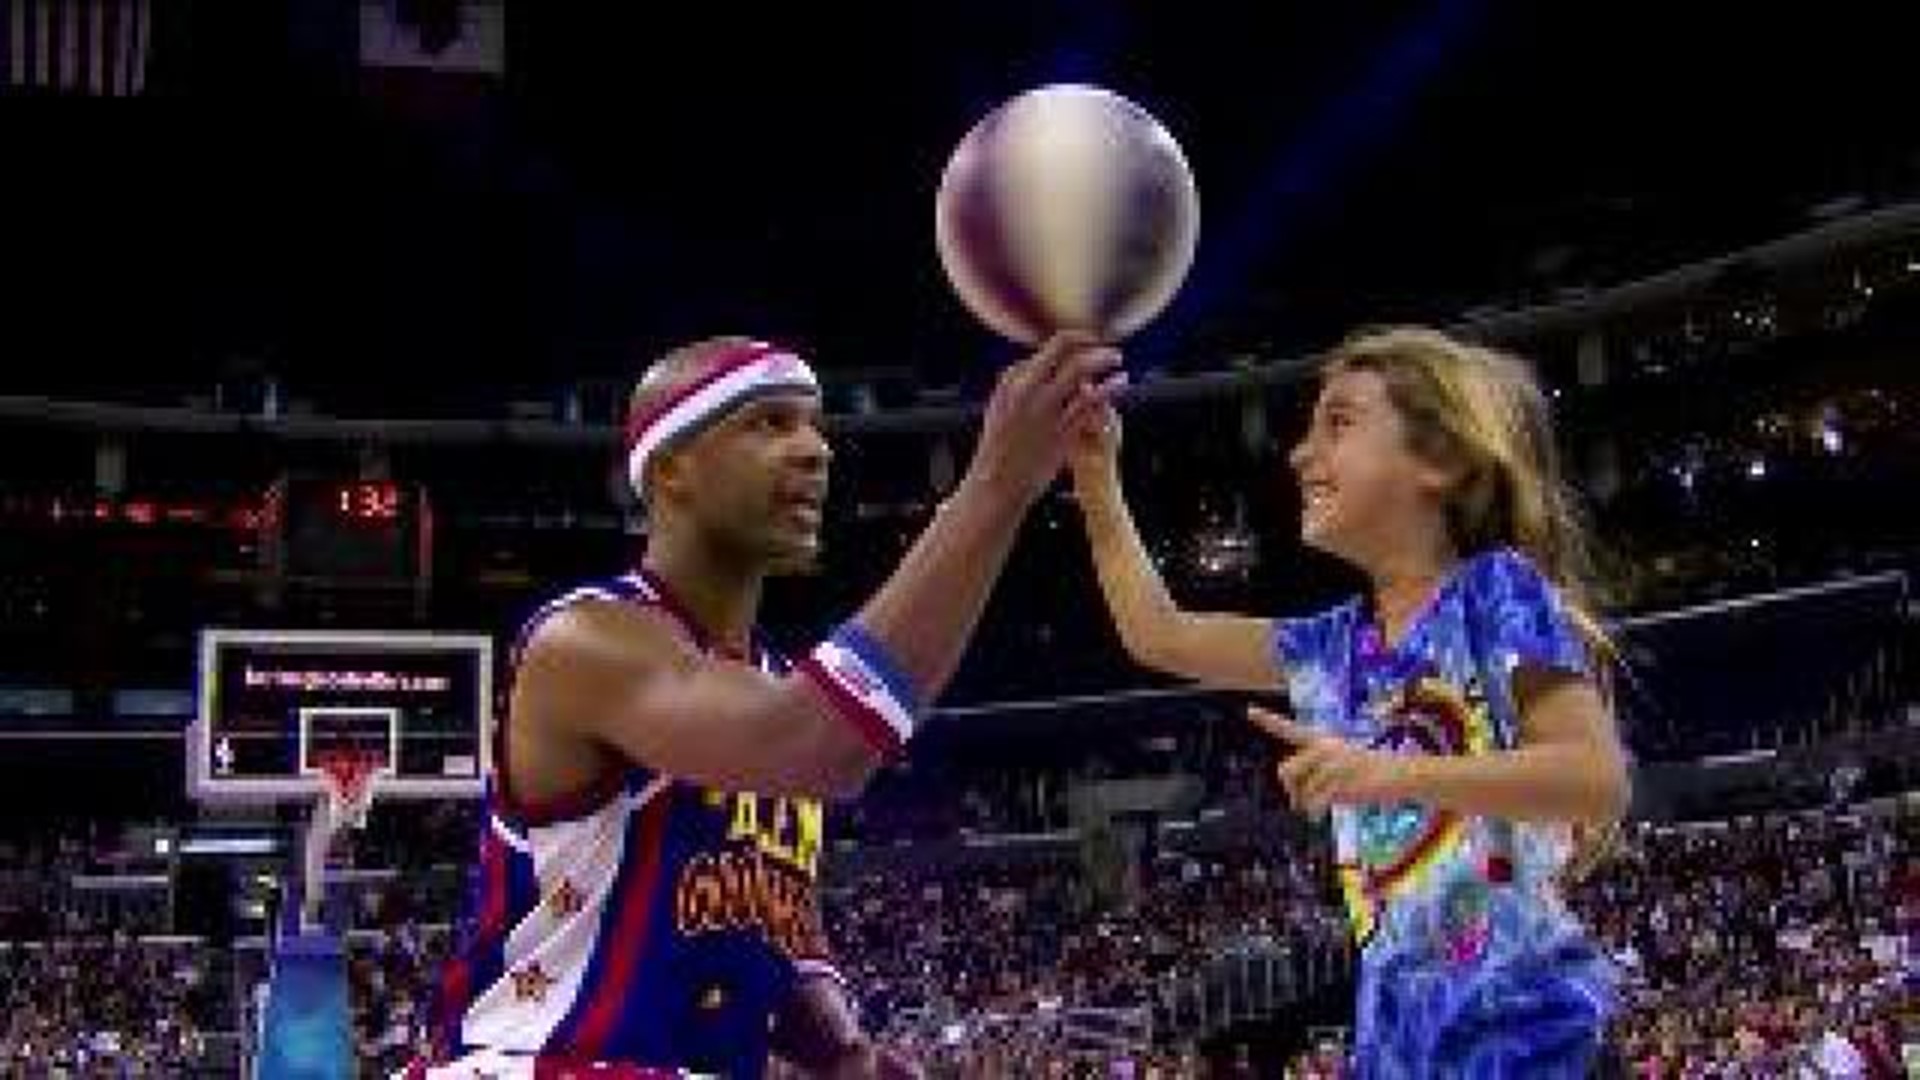 Harlem Globetrotters Bring the Defense to Stop Bullying